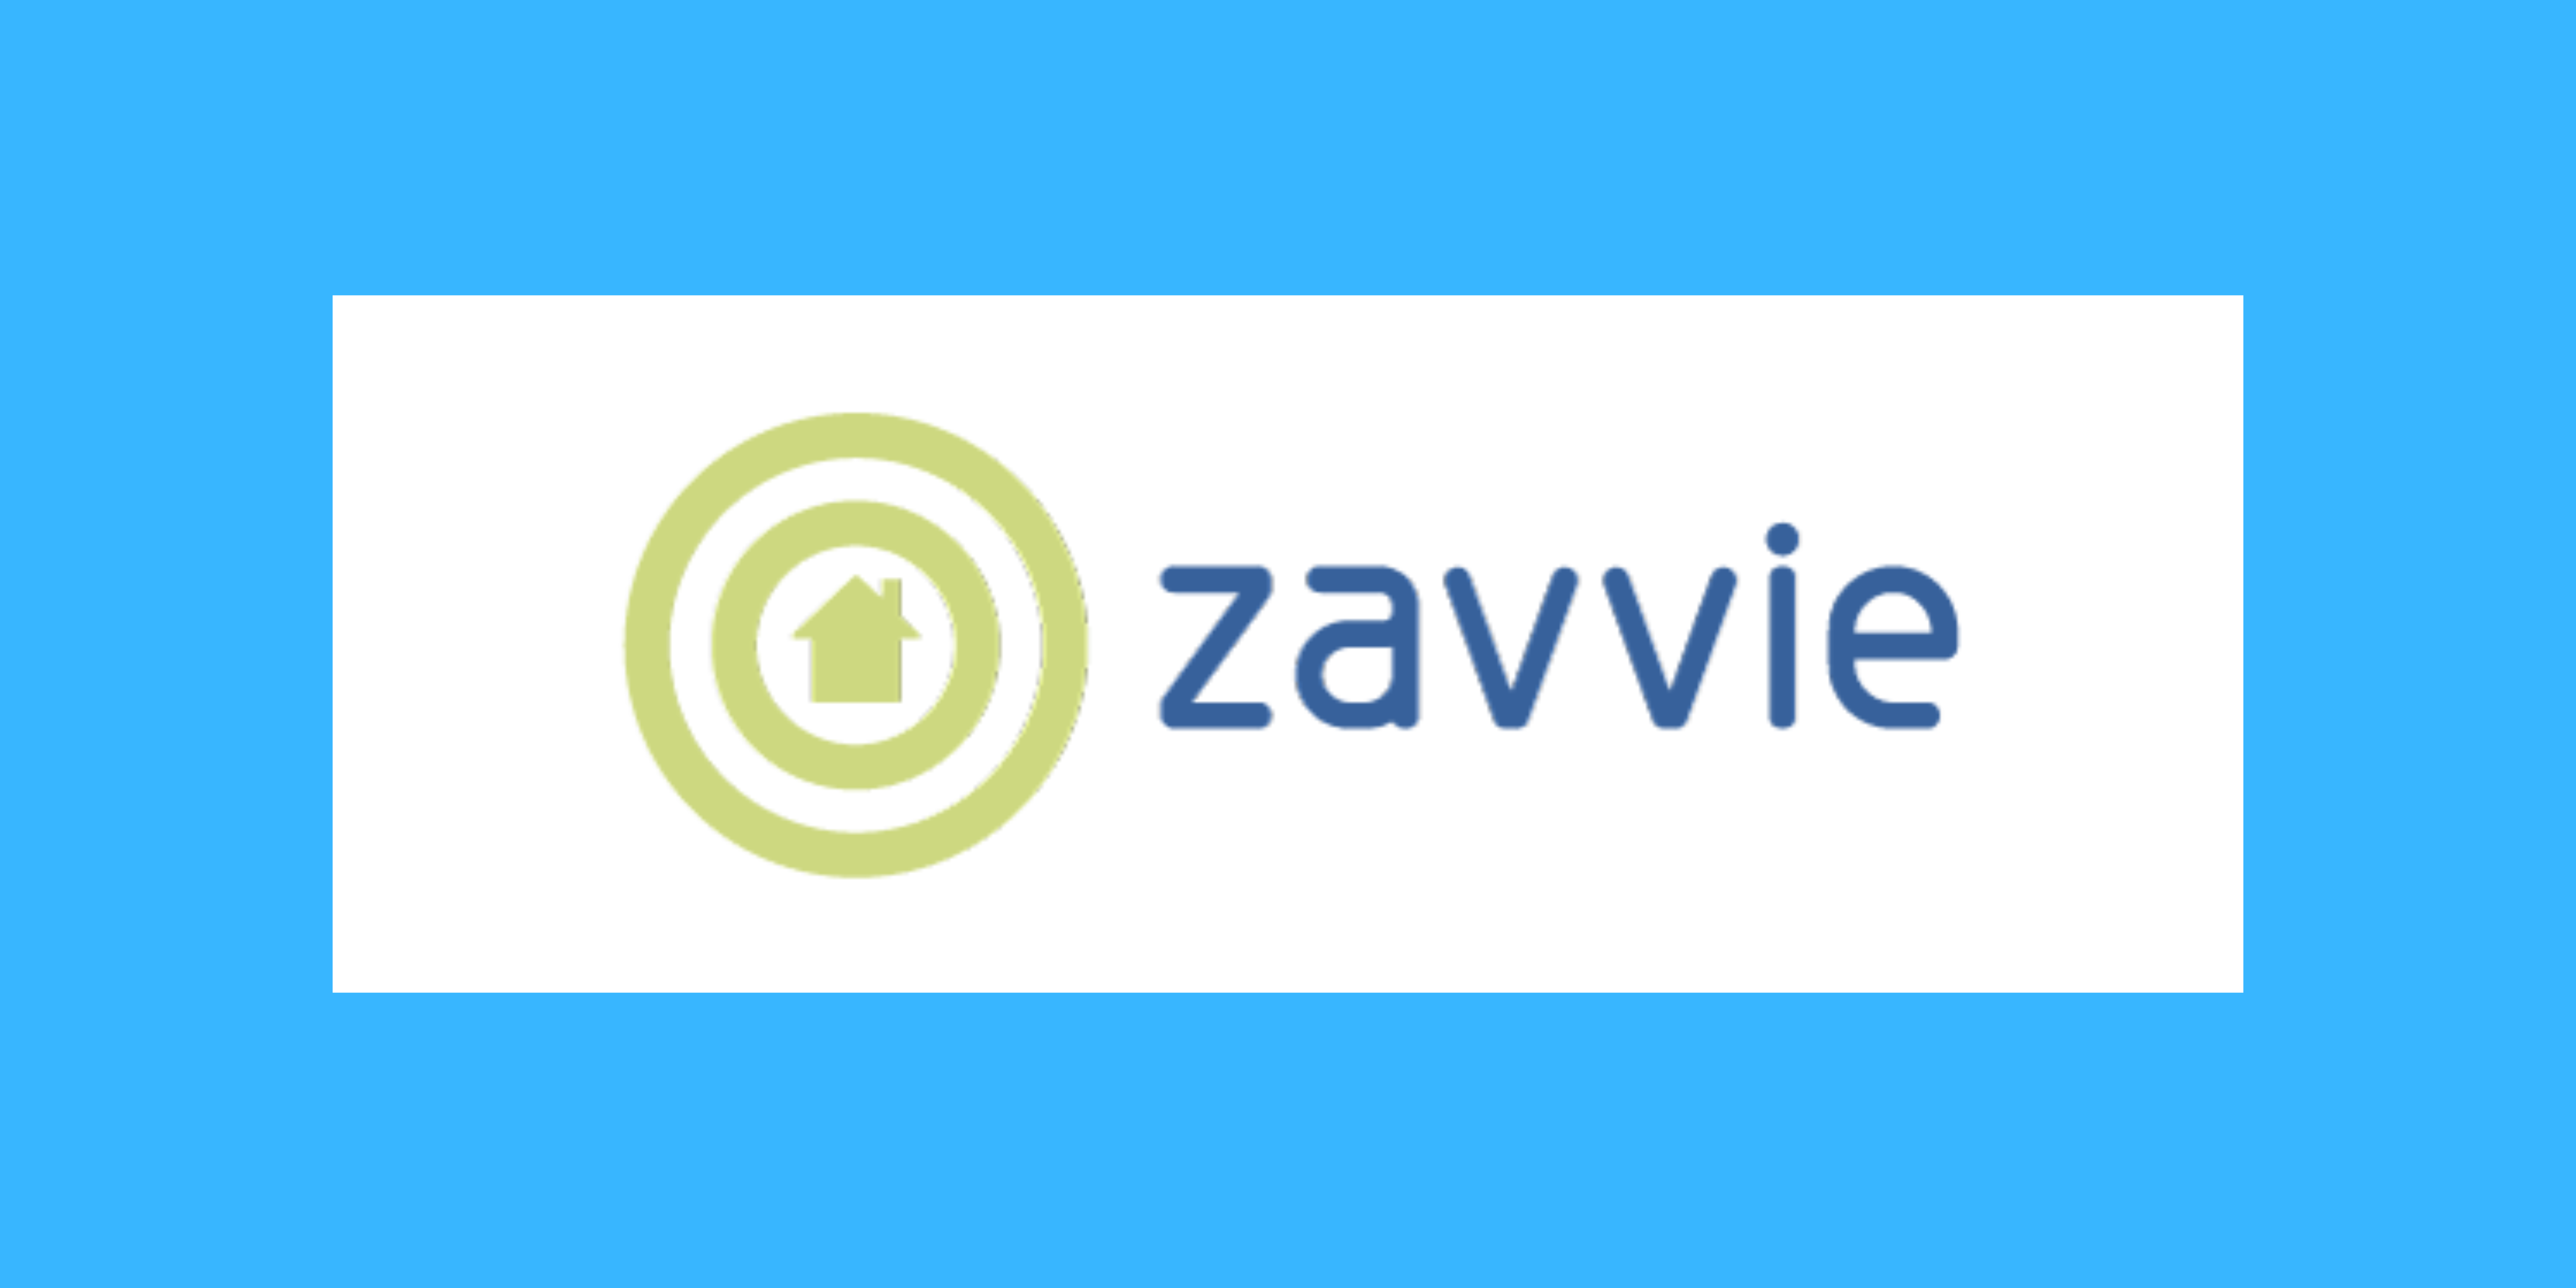 Brokers Can Access “Buy Before You Sell,” Cash Offers From zavvie